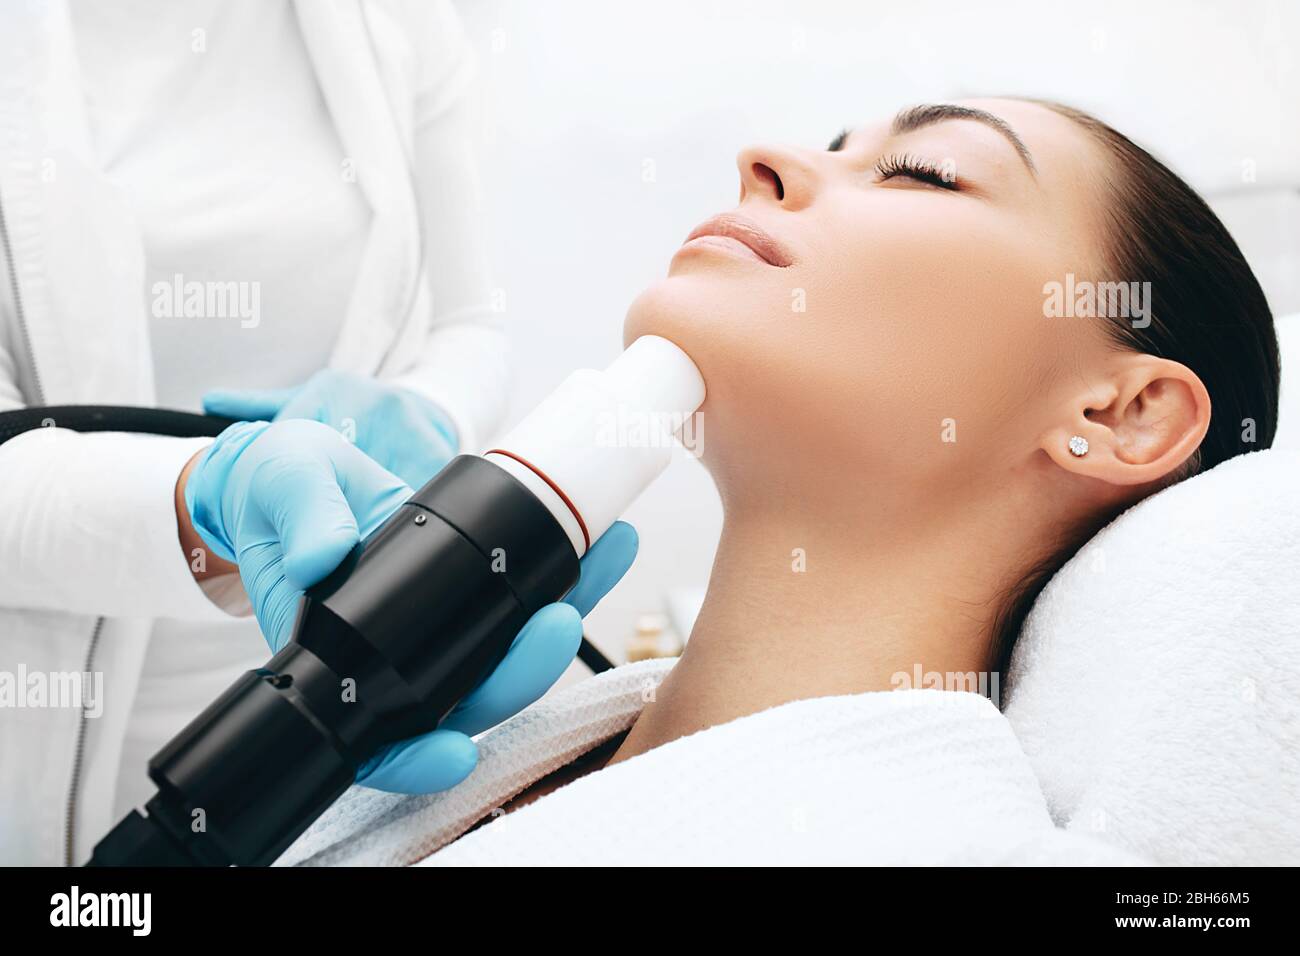 Beautician doing an acoustic wave therapy to a woman. Skin rejuvenation with acoustic waves, close-up face Stock Photo